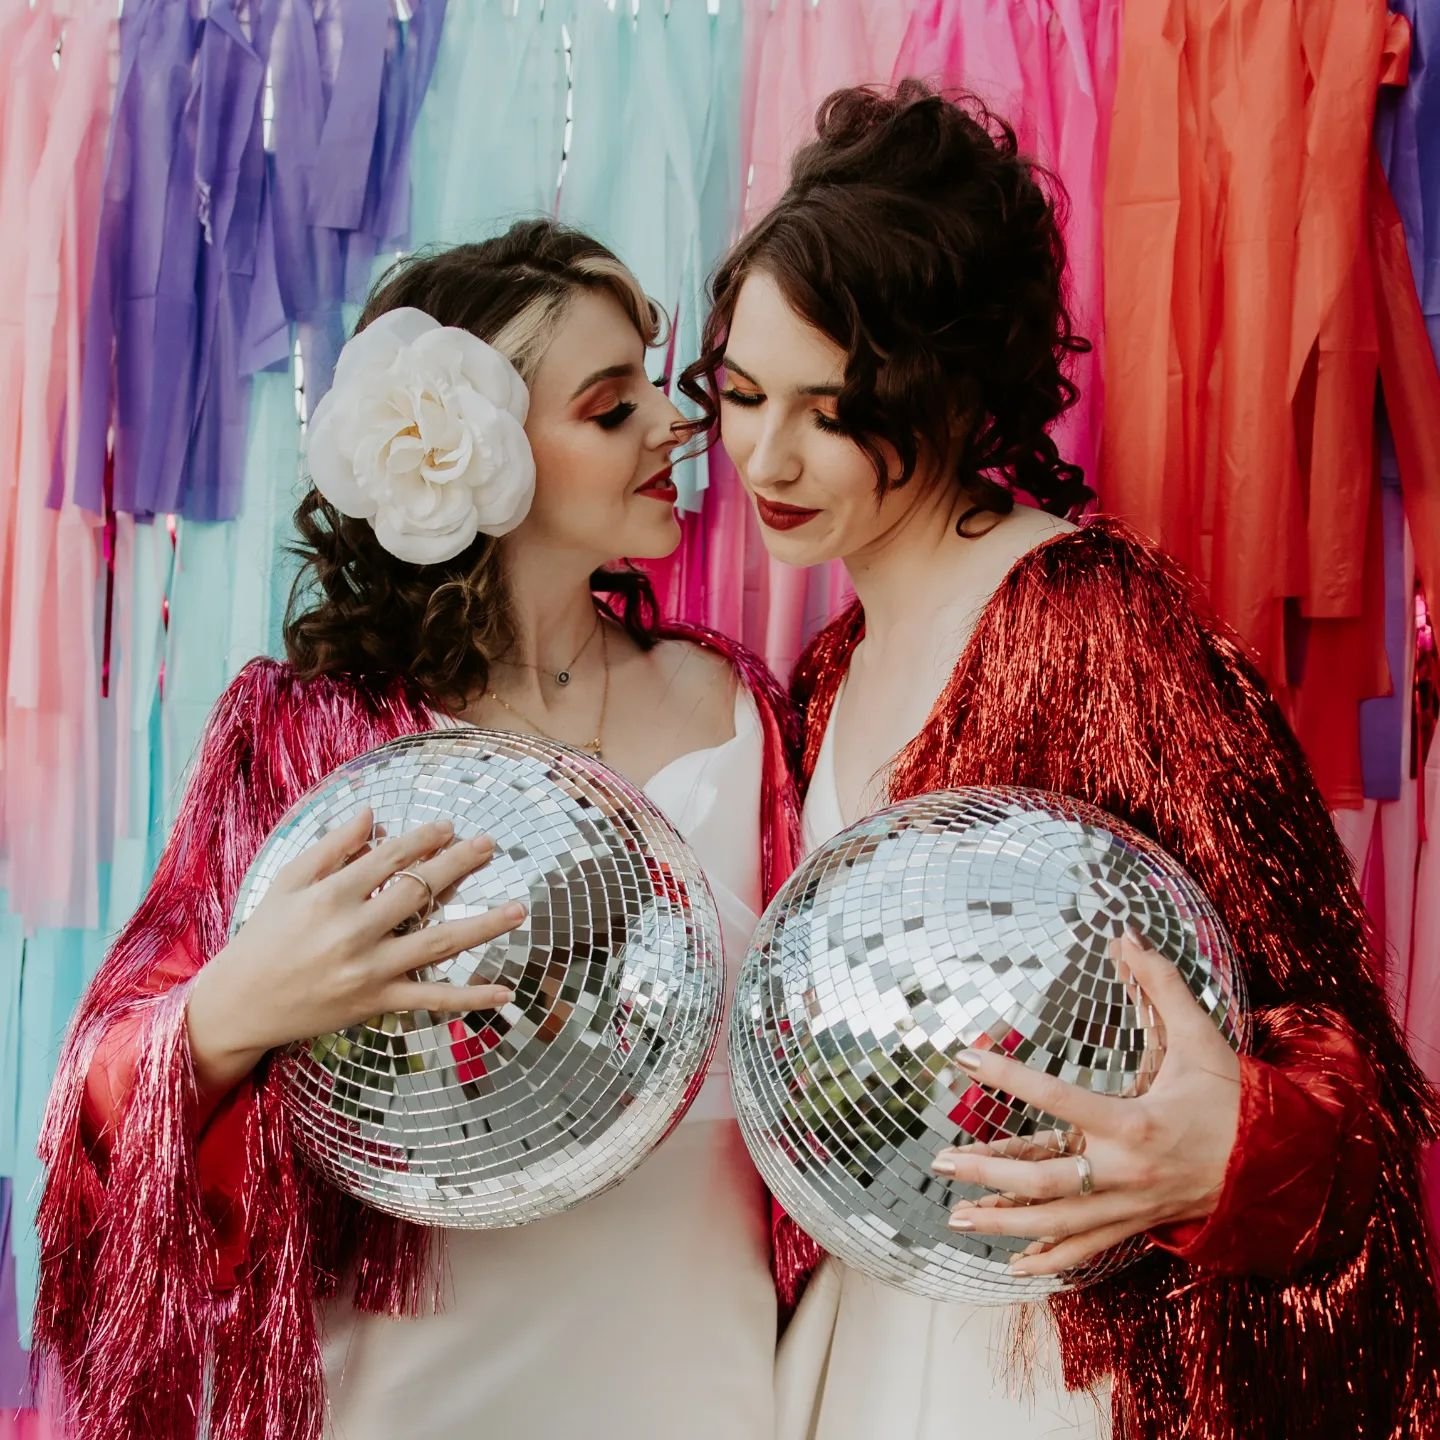 Give me more of this 

Putting together this collab love is love funky wedding shoot was so fun!
I hoped to do this again this year
Would anyone be interested
Vendors?
Last year I reached out to and pulled together some of the coolest vendors and thi